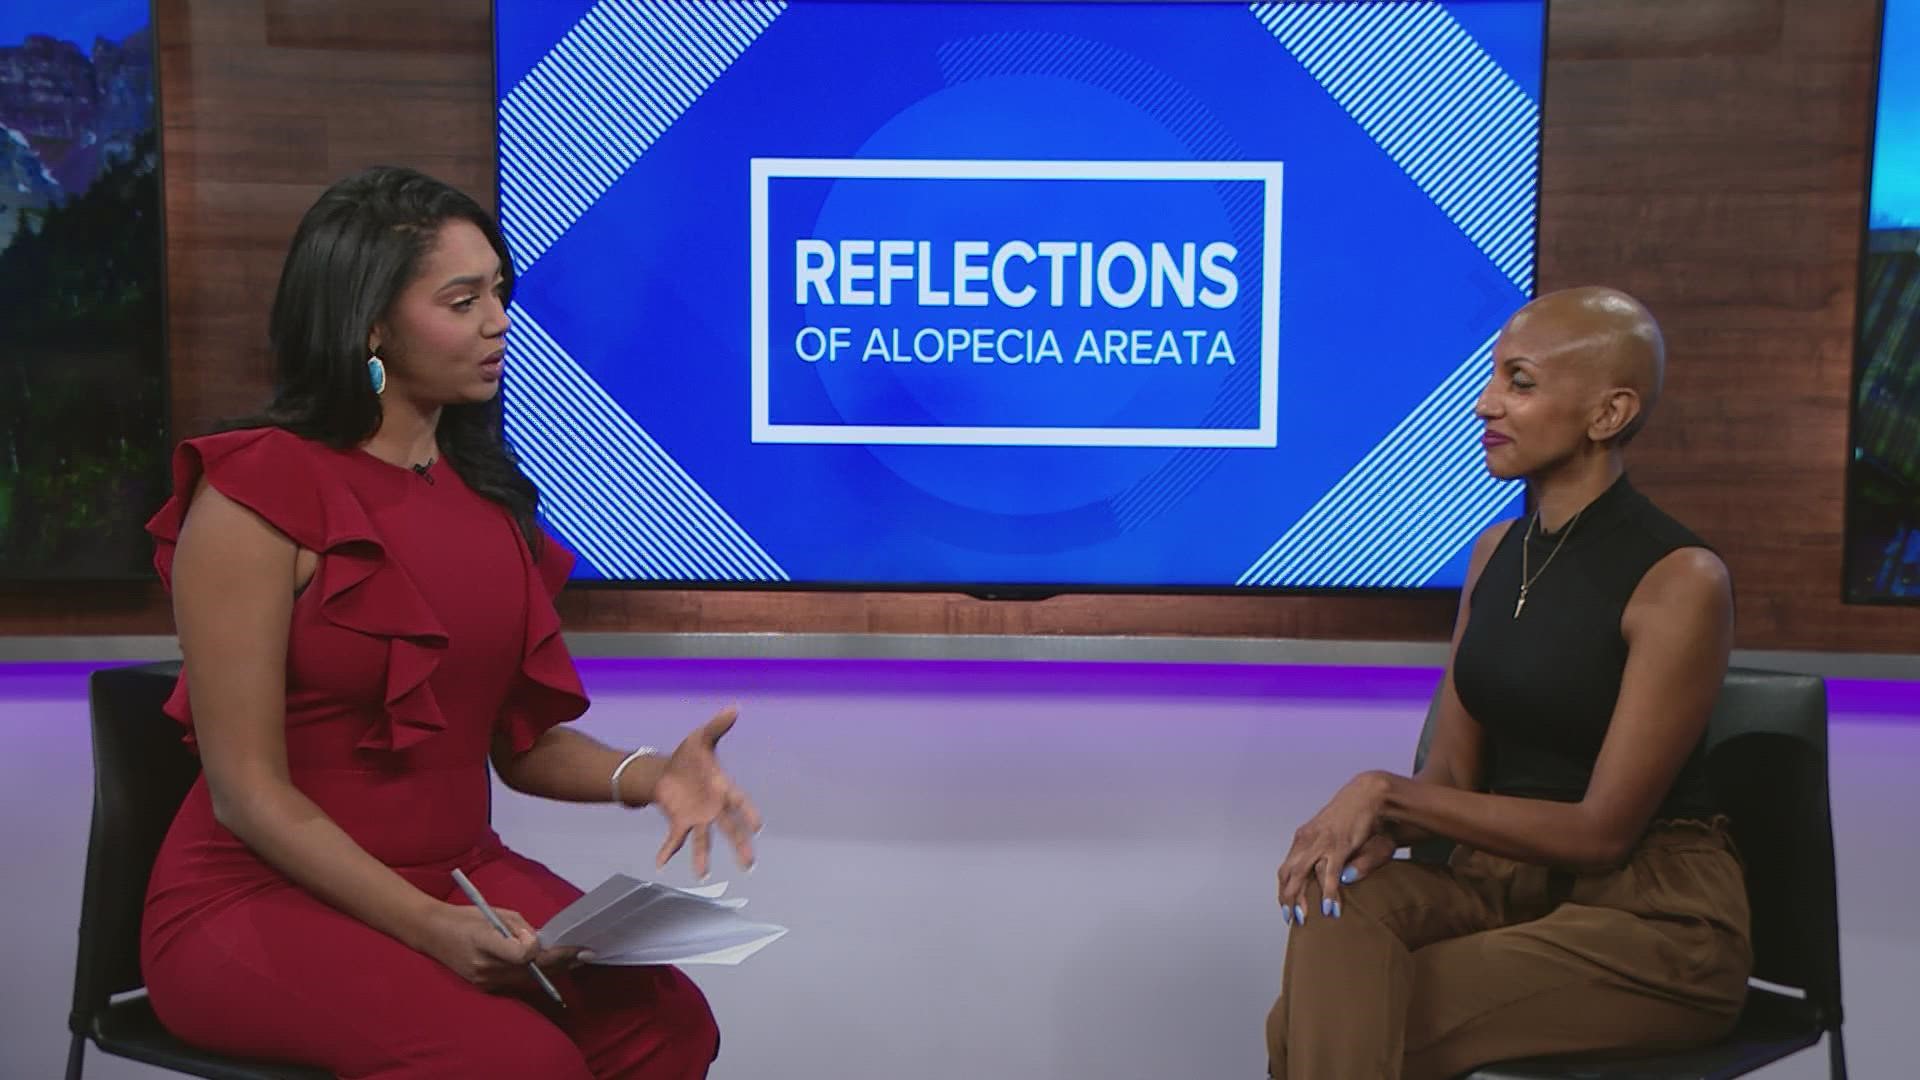 There's a campaign in Denver called 'Reflections of Alopecia Areata' where women are sharing their experiences with the disease.